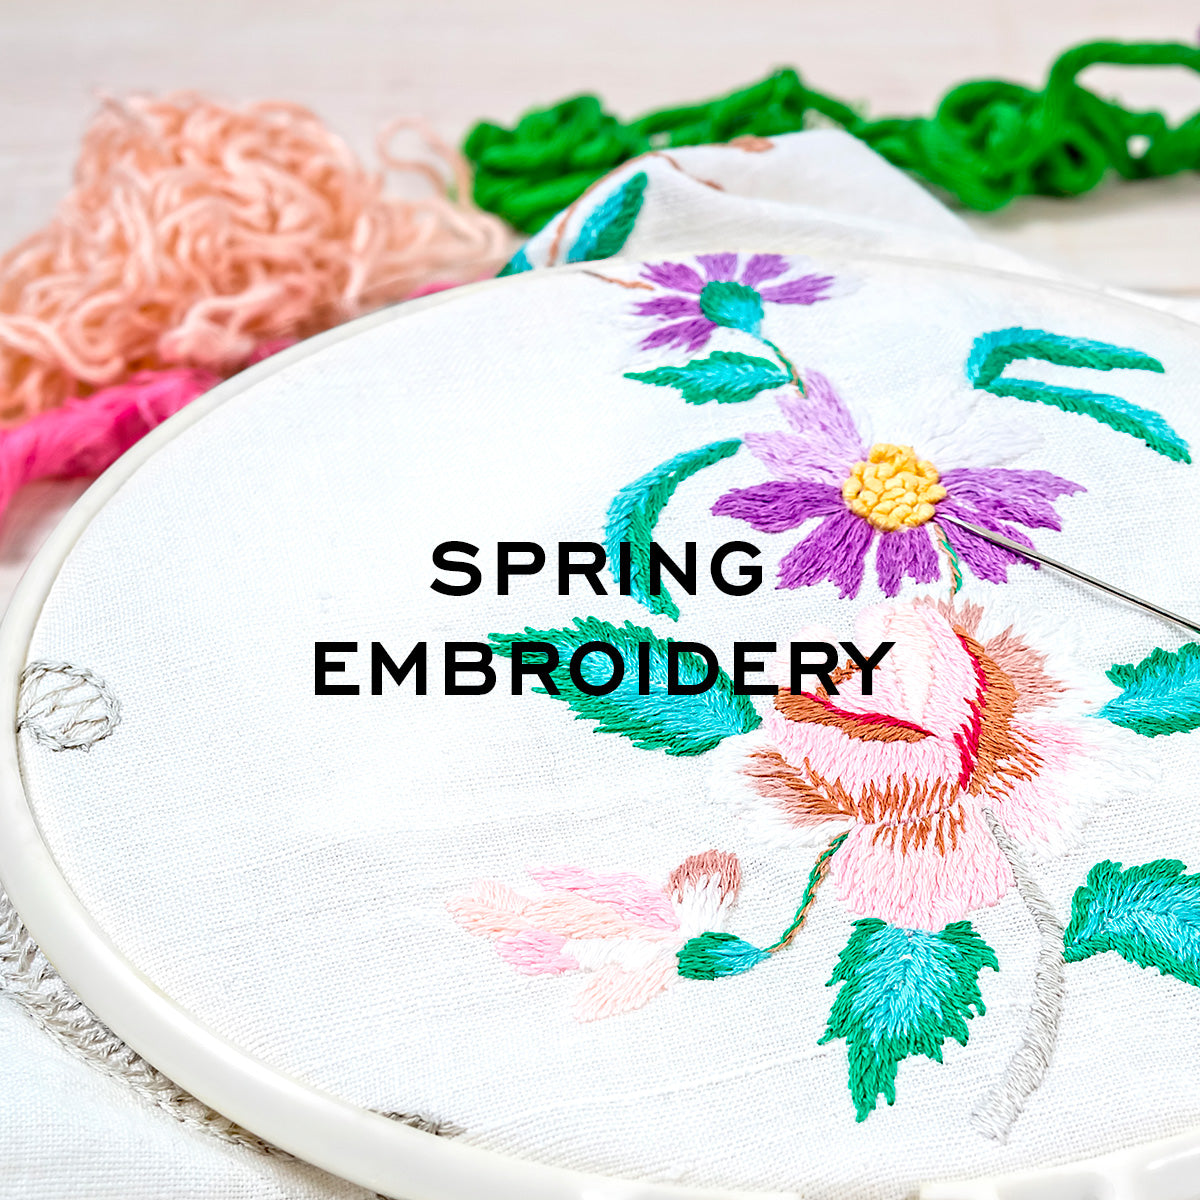 SPRING EMBROIDERY